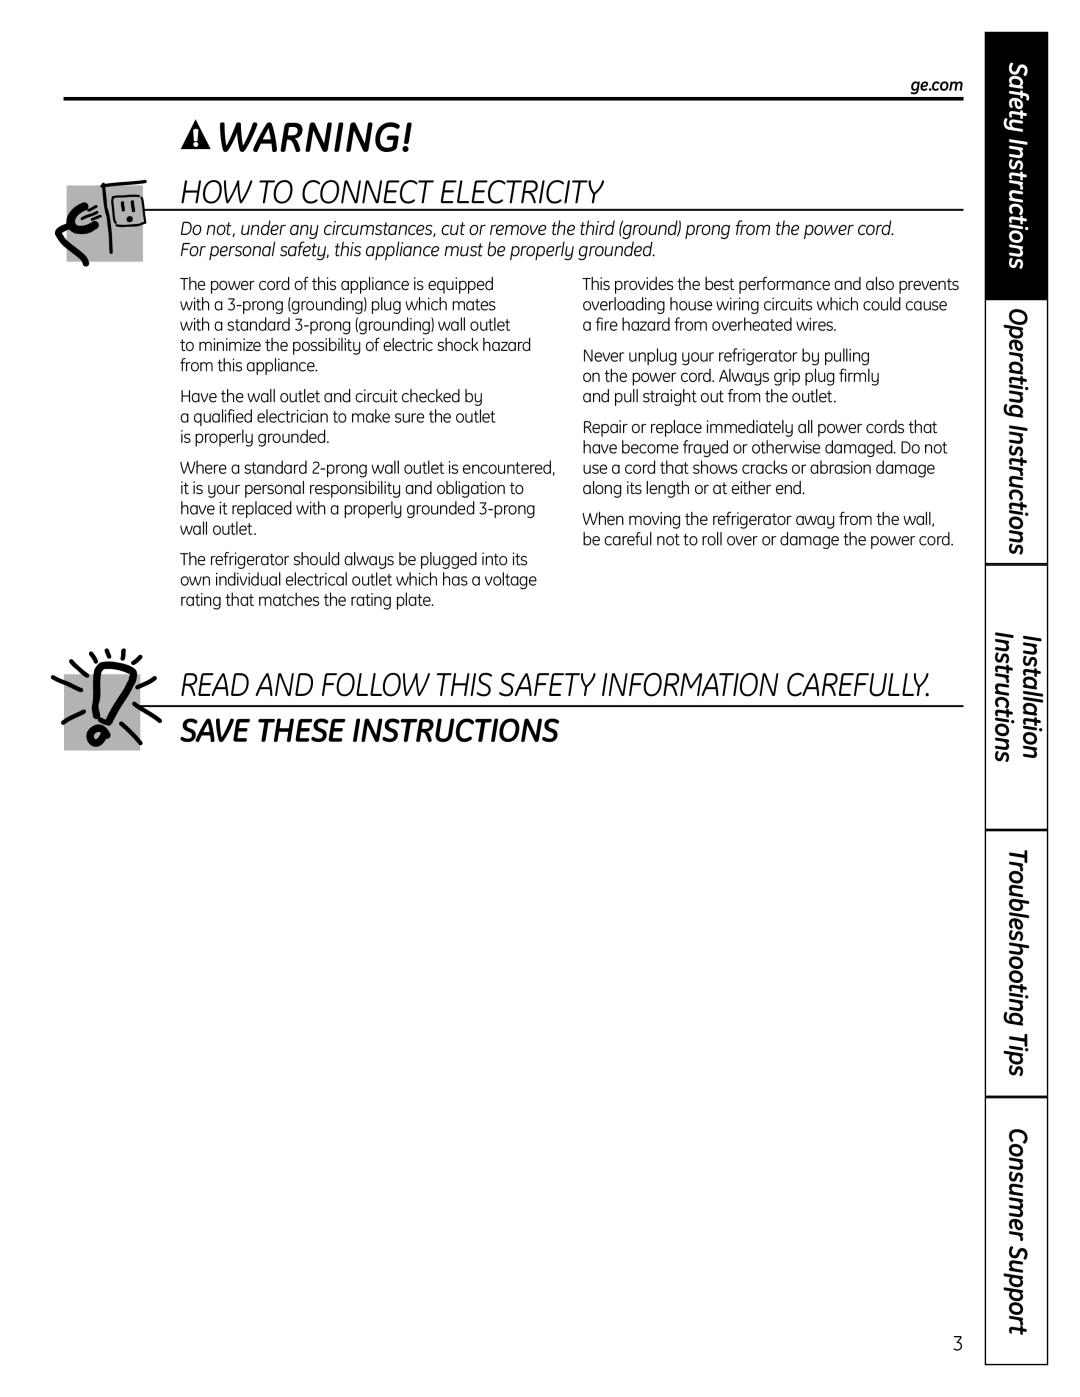 GE PFSS6SMXSS How To Connect Electricity, Save These Instructions, Operating Instructions, Safety Instructions 